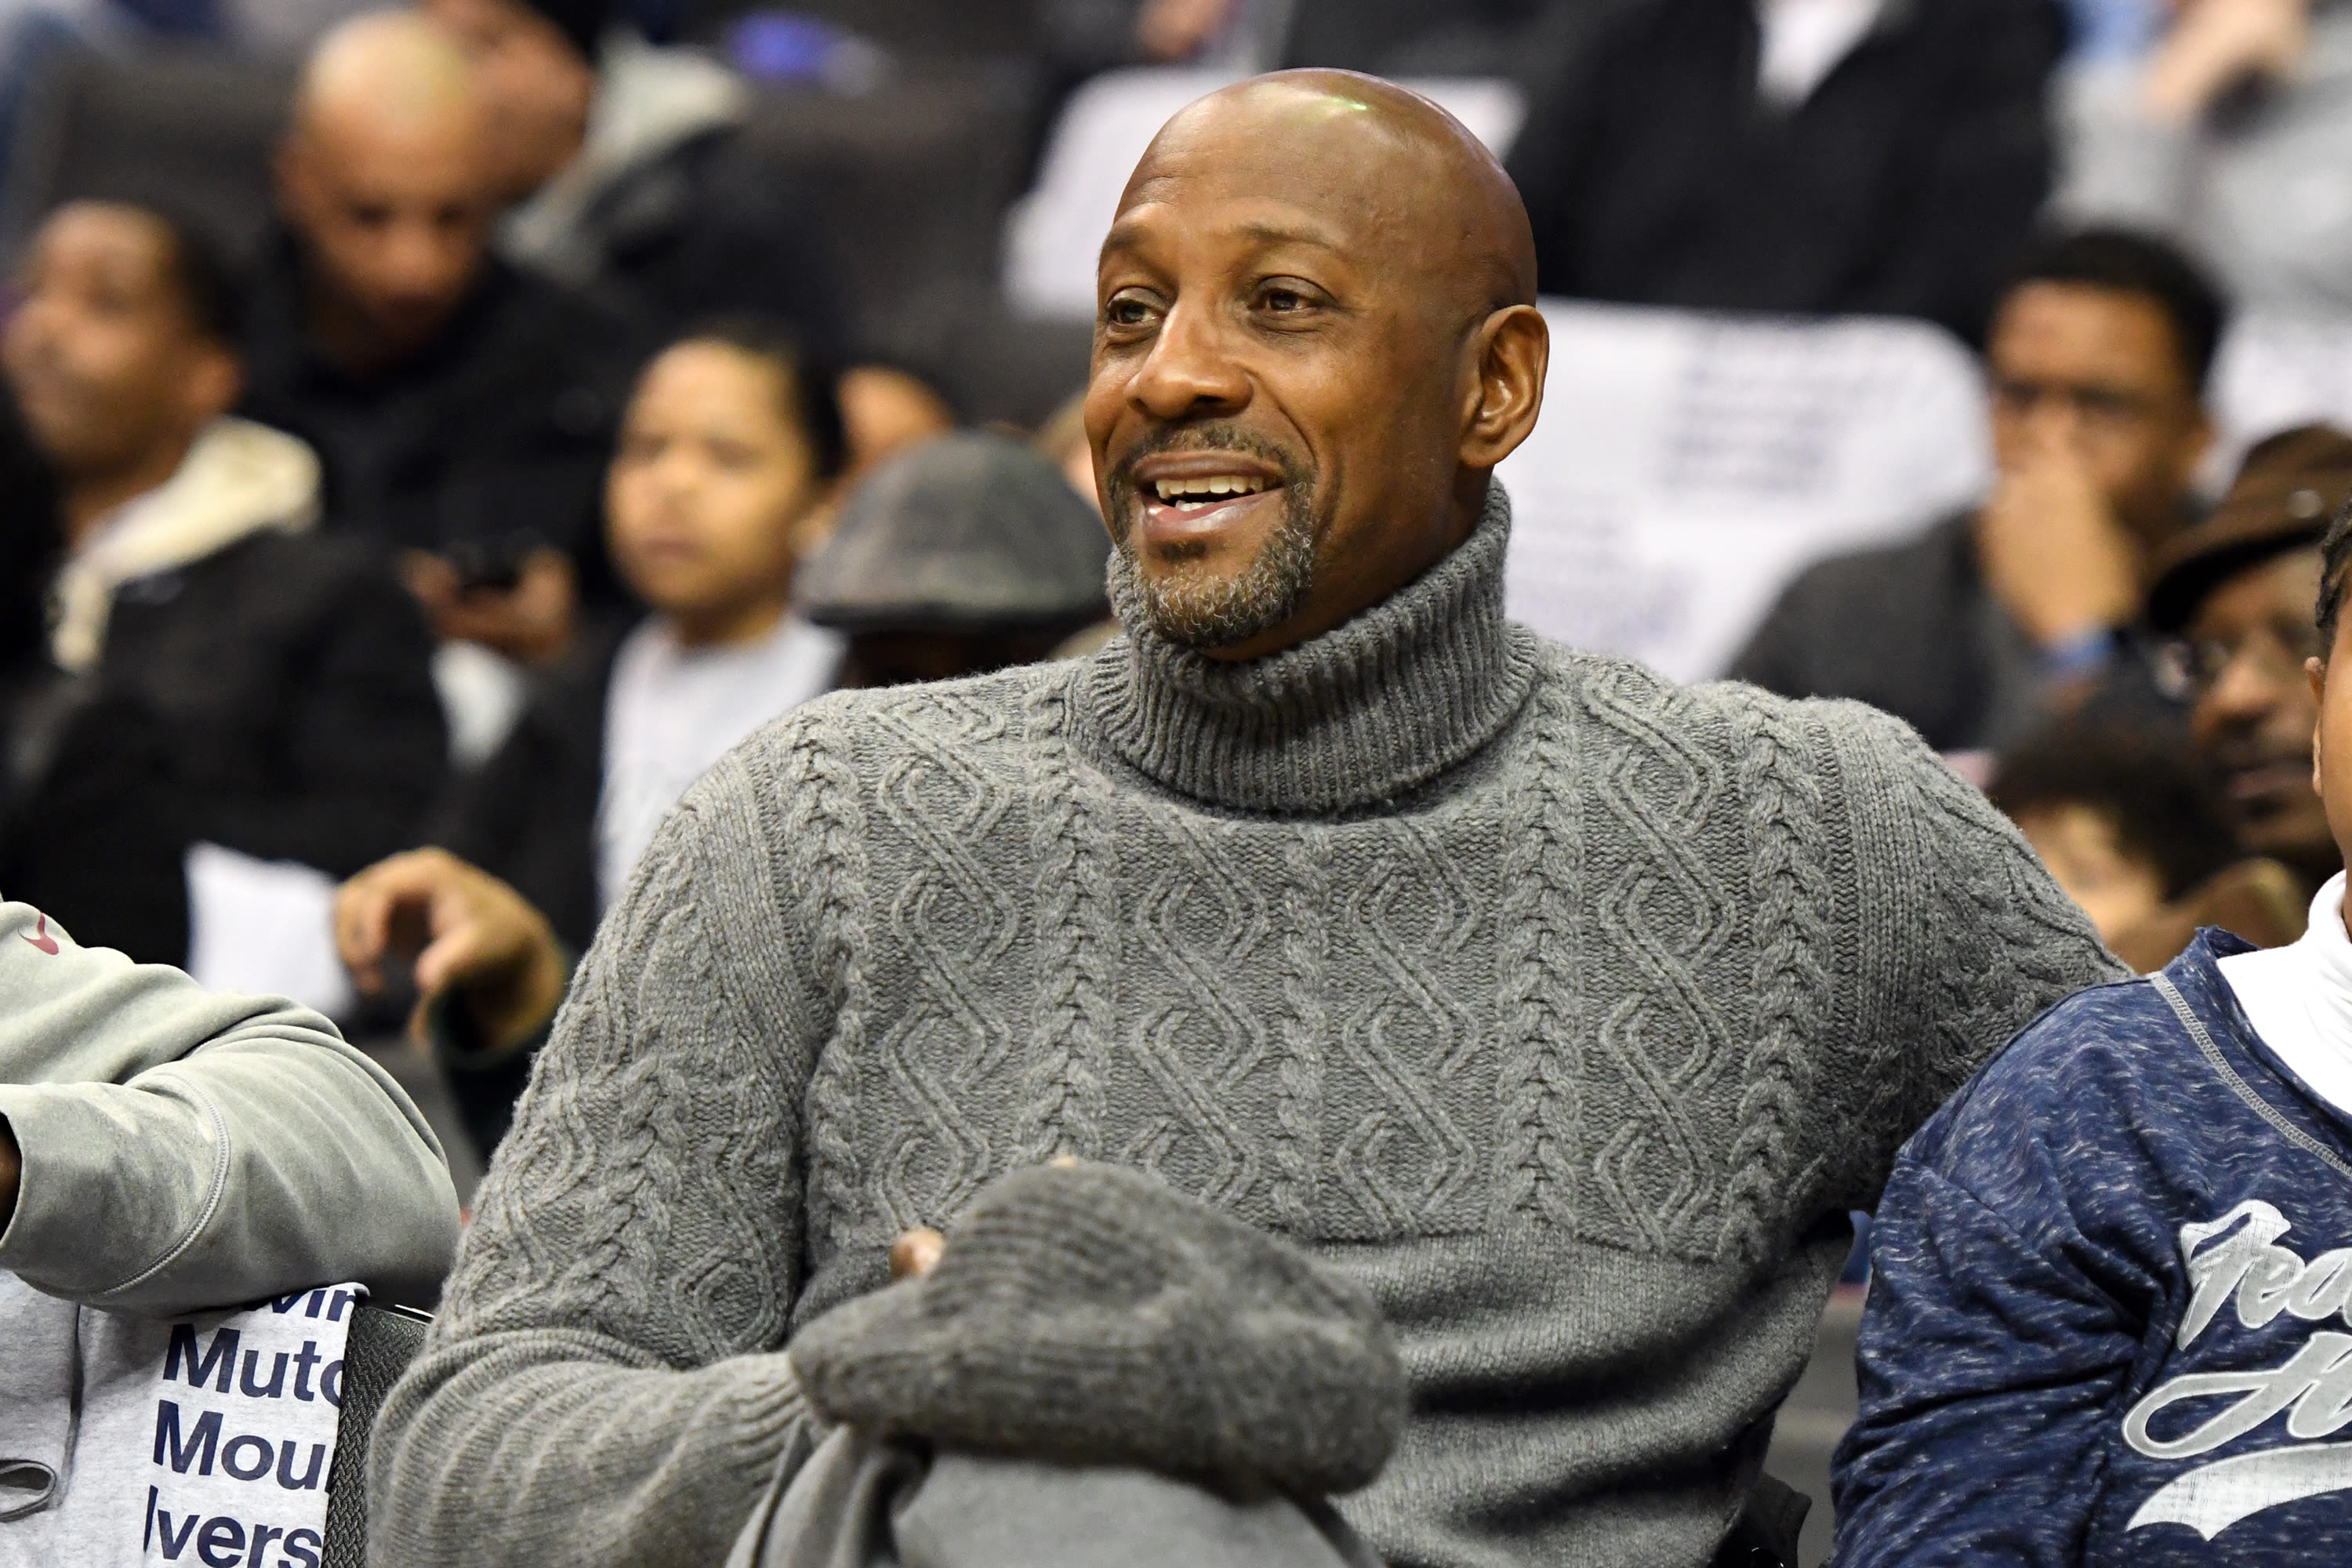 Alonzo Mourning had surgery to remove prostate following cancer diagnosis